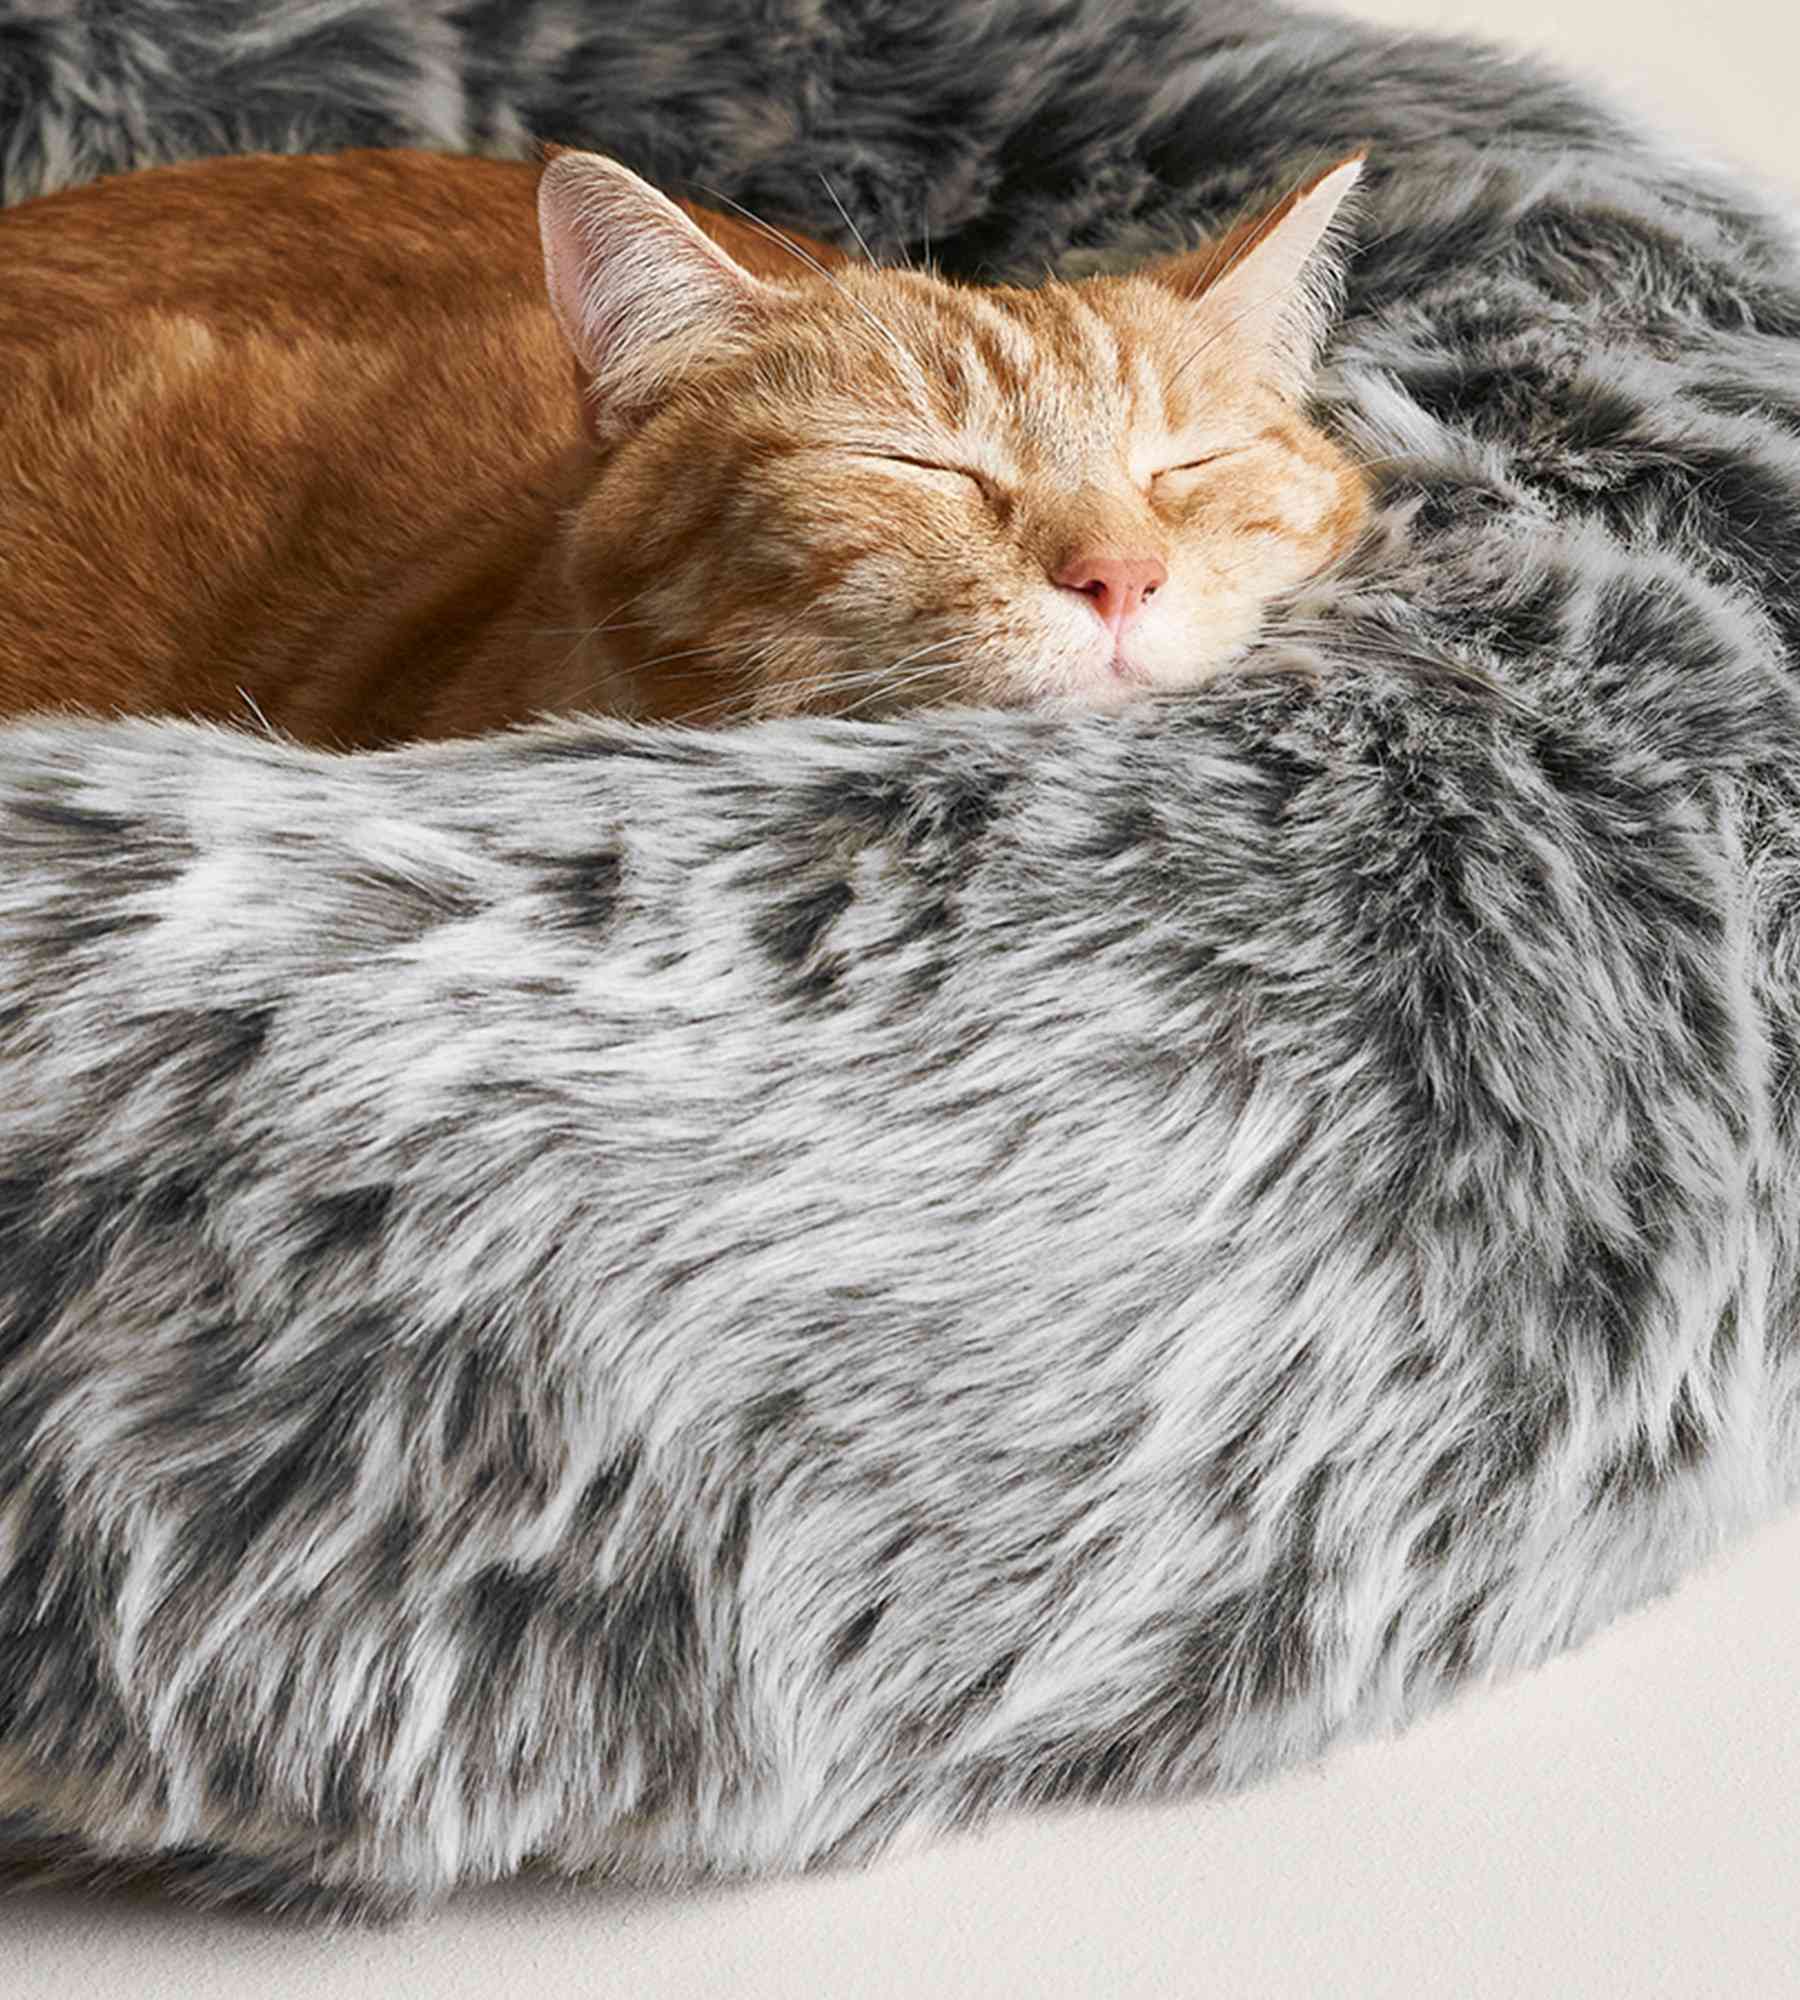 2024 Cat Lovers Gift Guide: 40+ Unique Gifts for Cat Lovers – tuft + paw